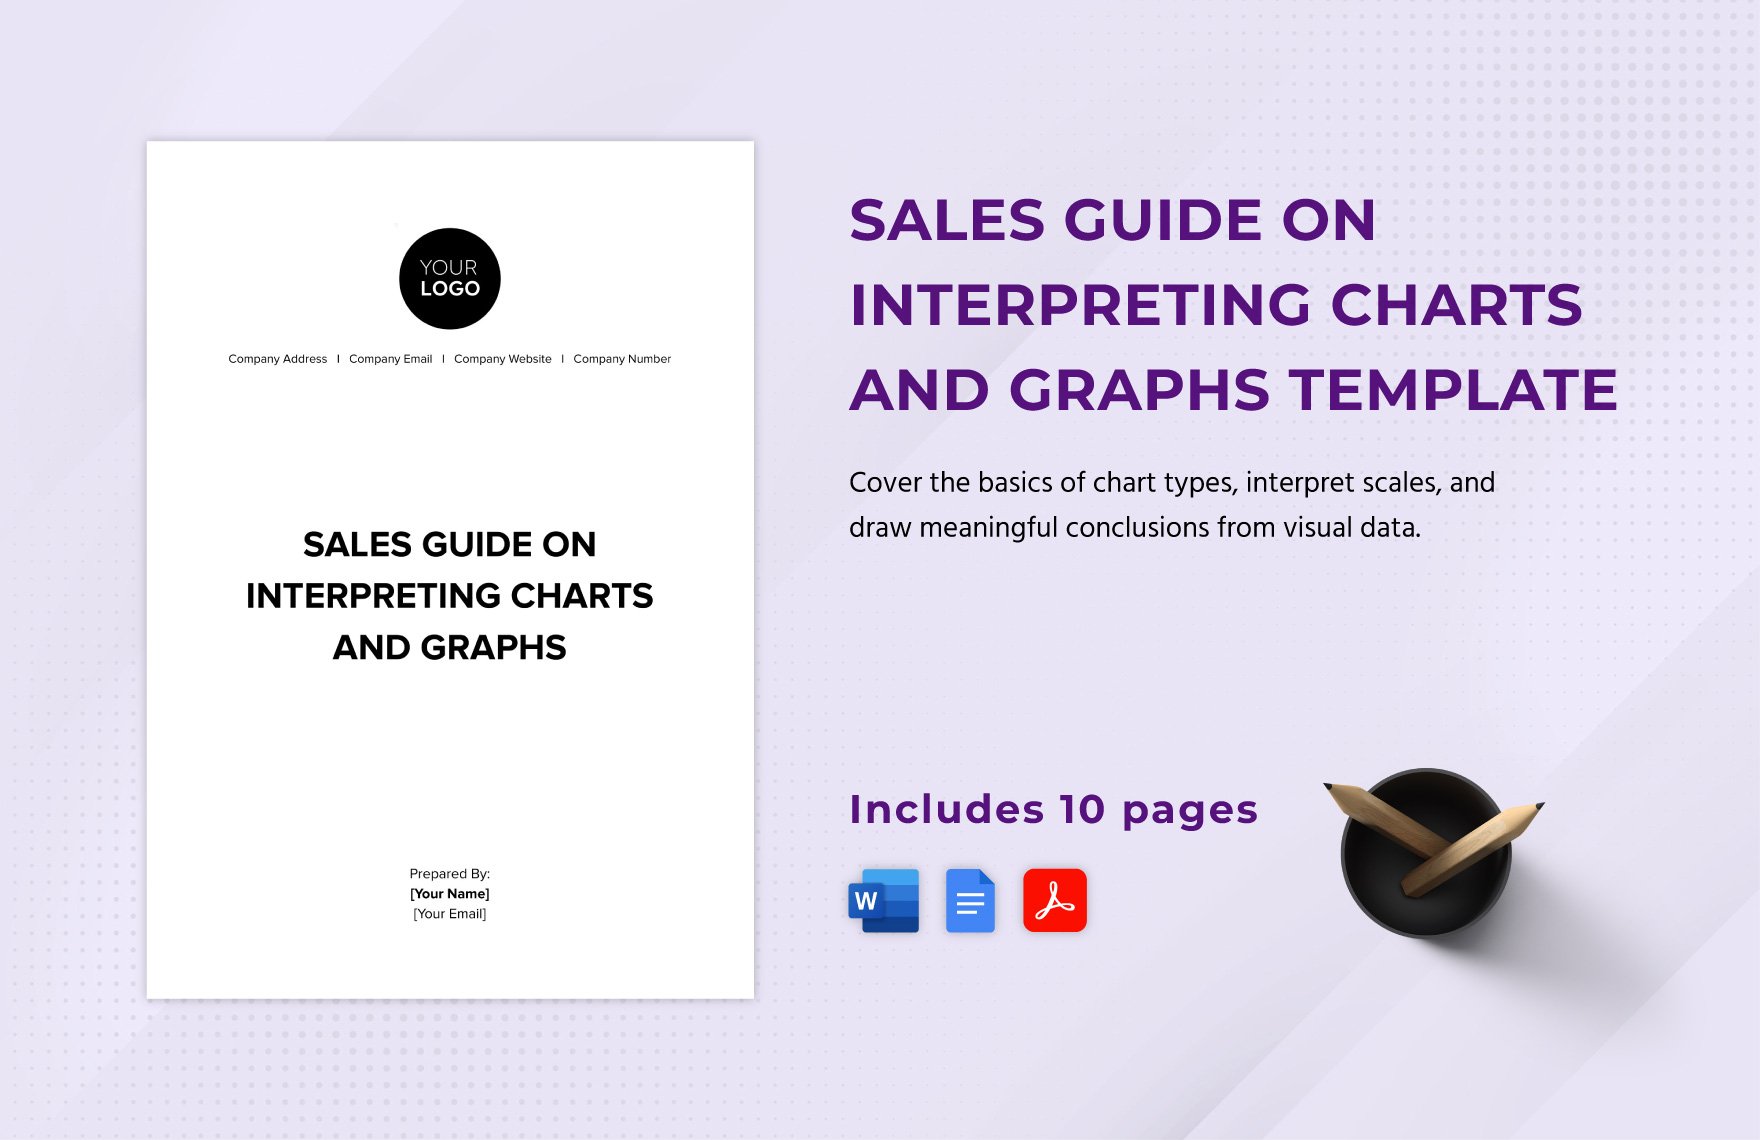 Sales Guide on Interpreting Charts and Graphs Template in Word, Google Docs, PDF